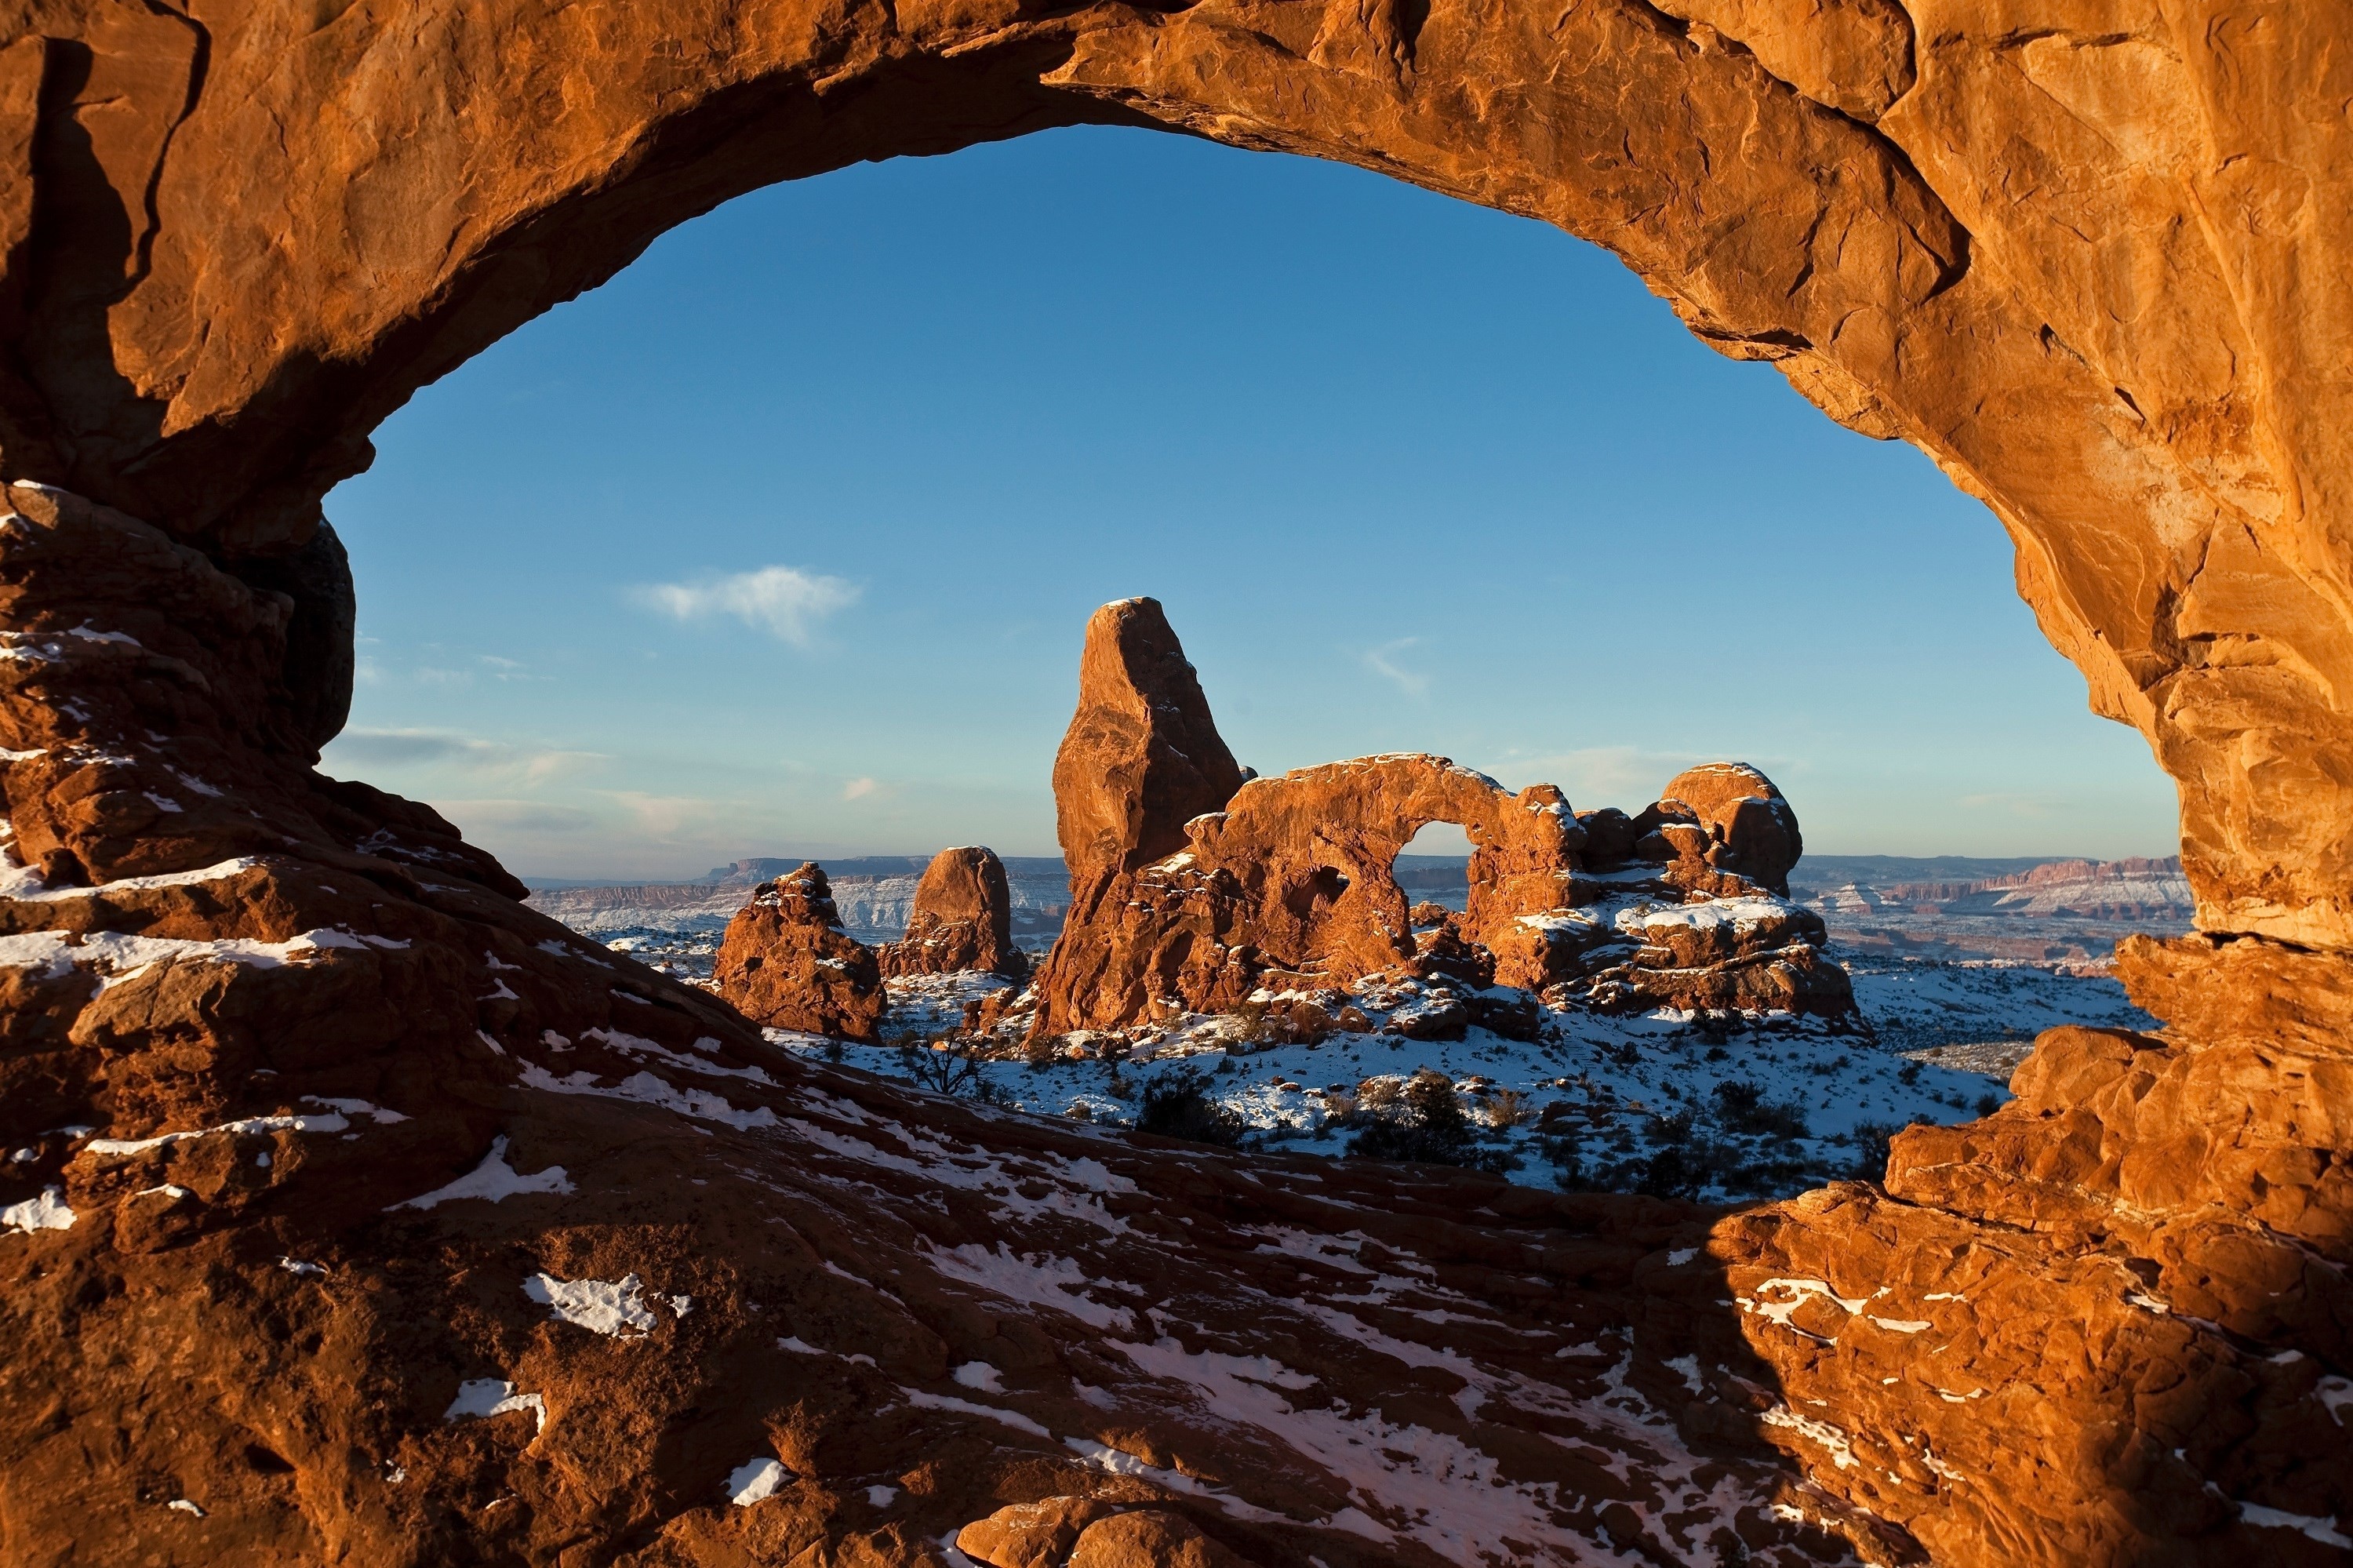 3000x1999 arches national park picture - Full HD Wallpapers, Photos, Fleetwood Fairy  2017-03